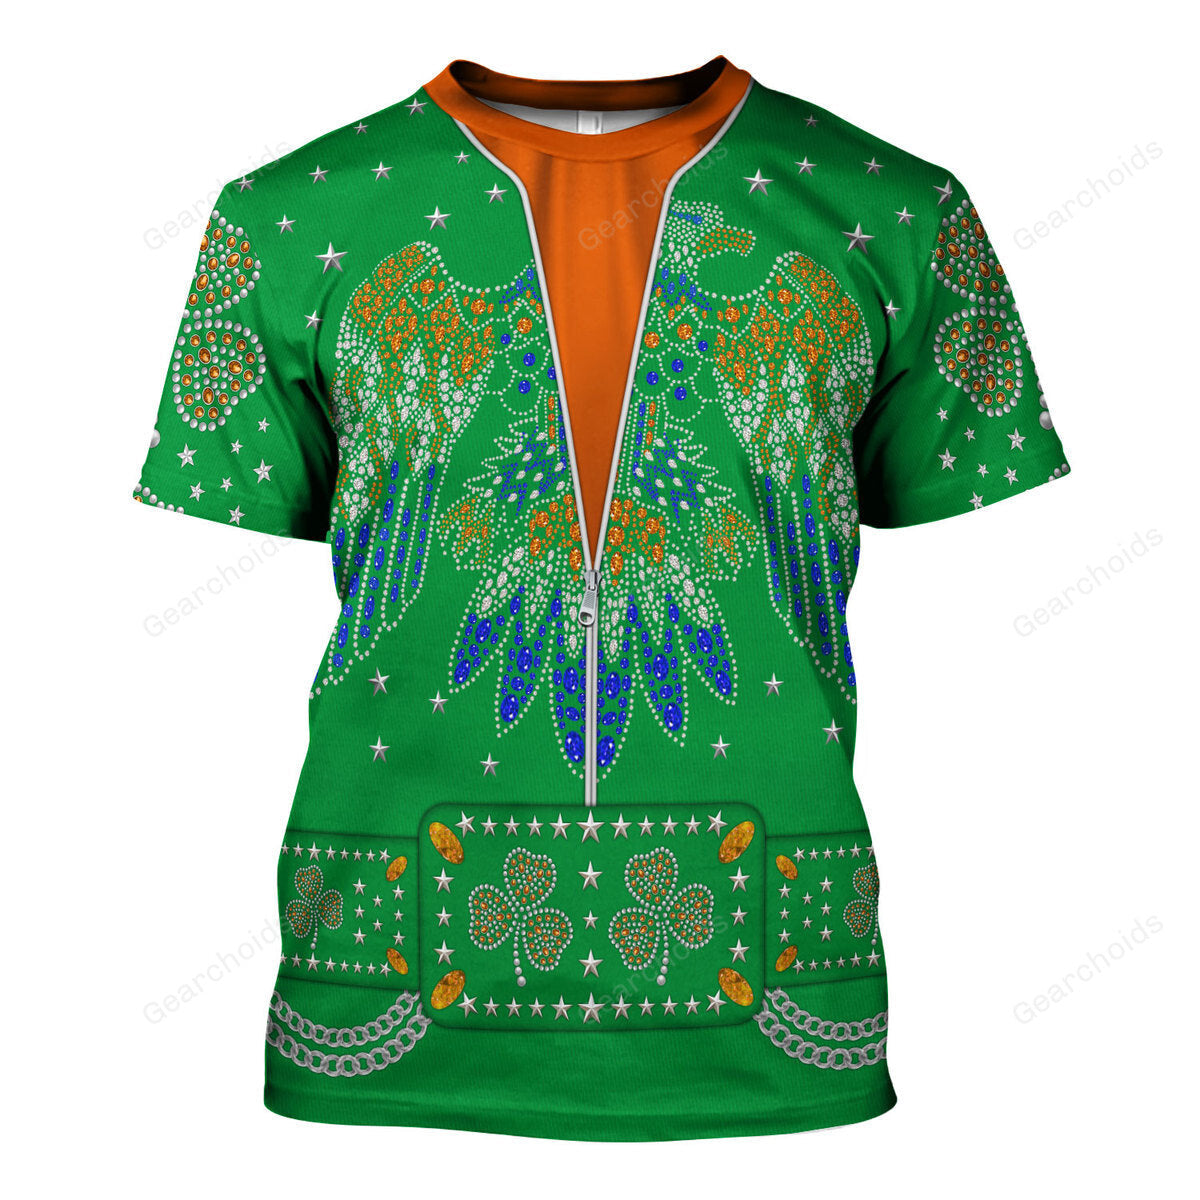 Celebrating The King Elvis Presley For St. Patrick's Day - Costume Cosplay T-Shirt